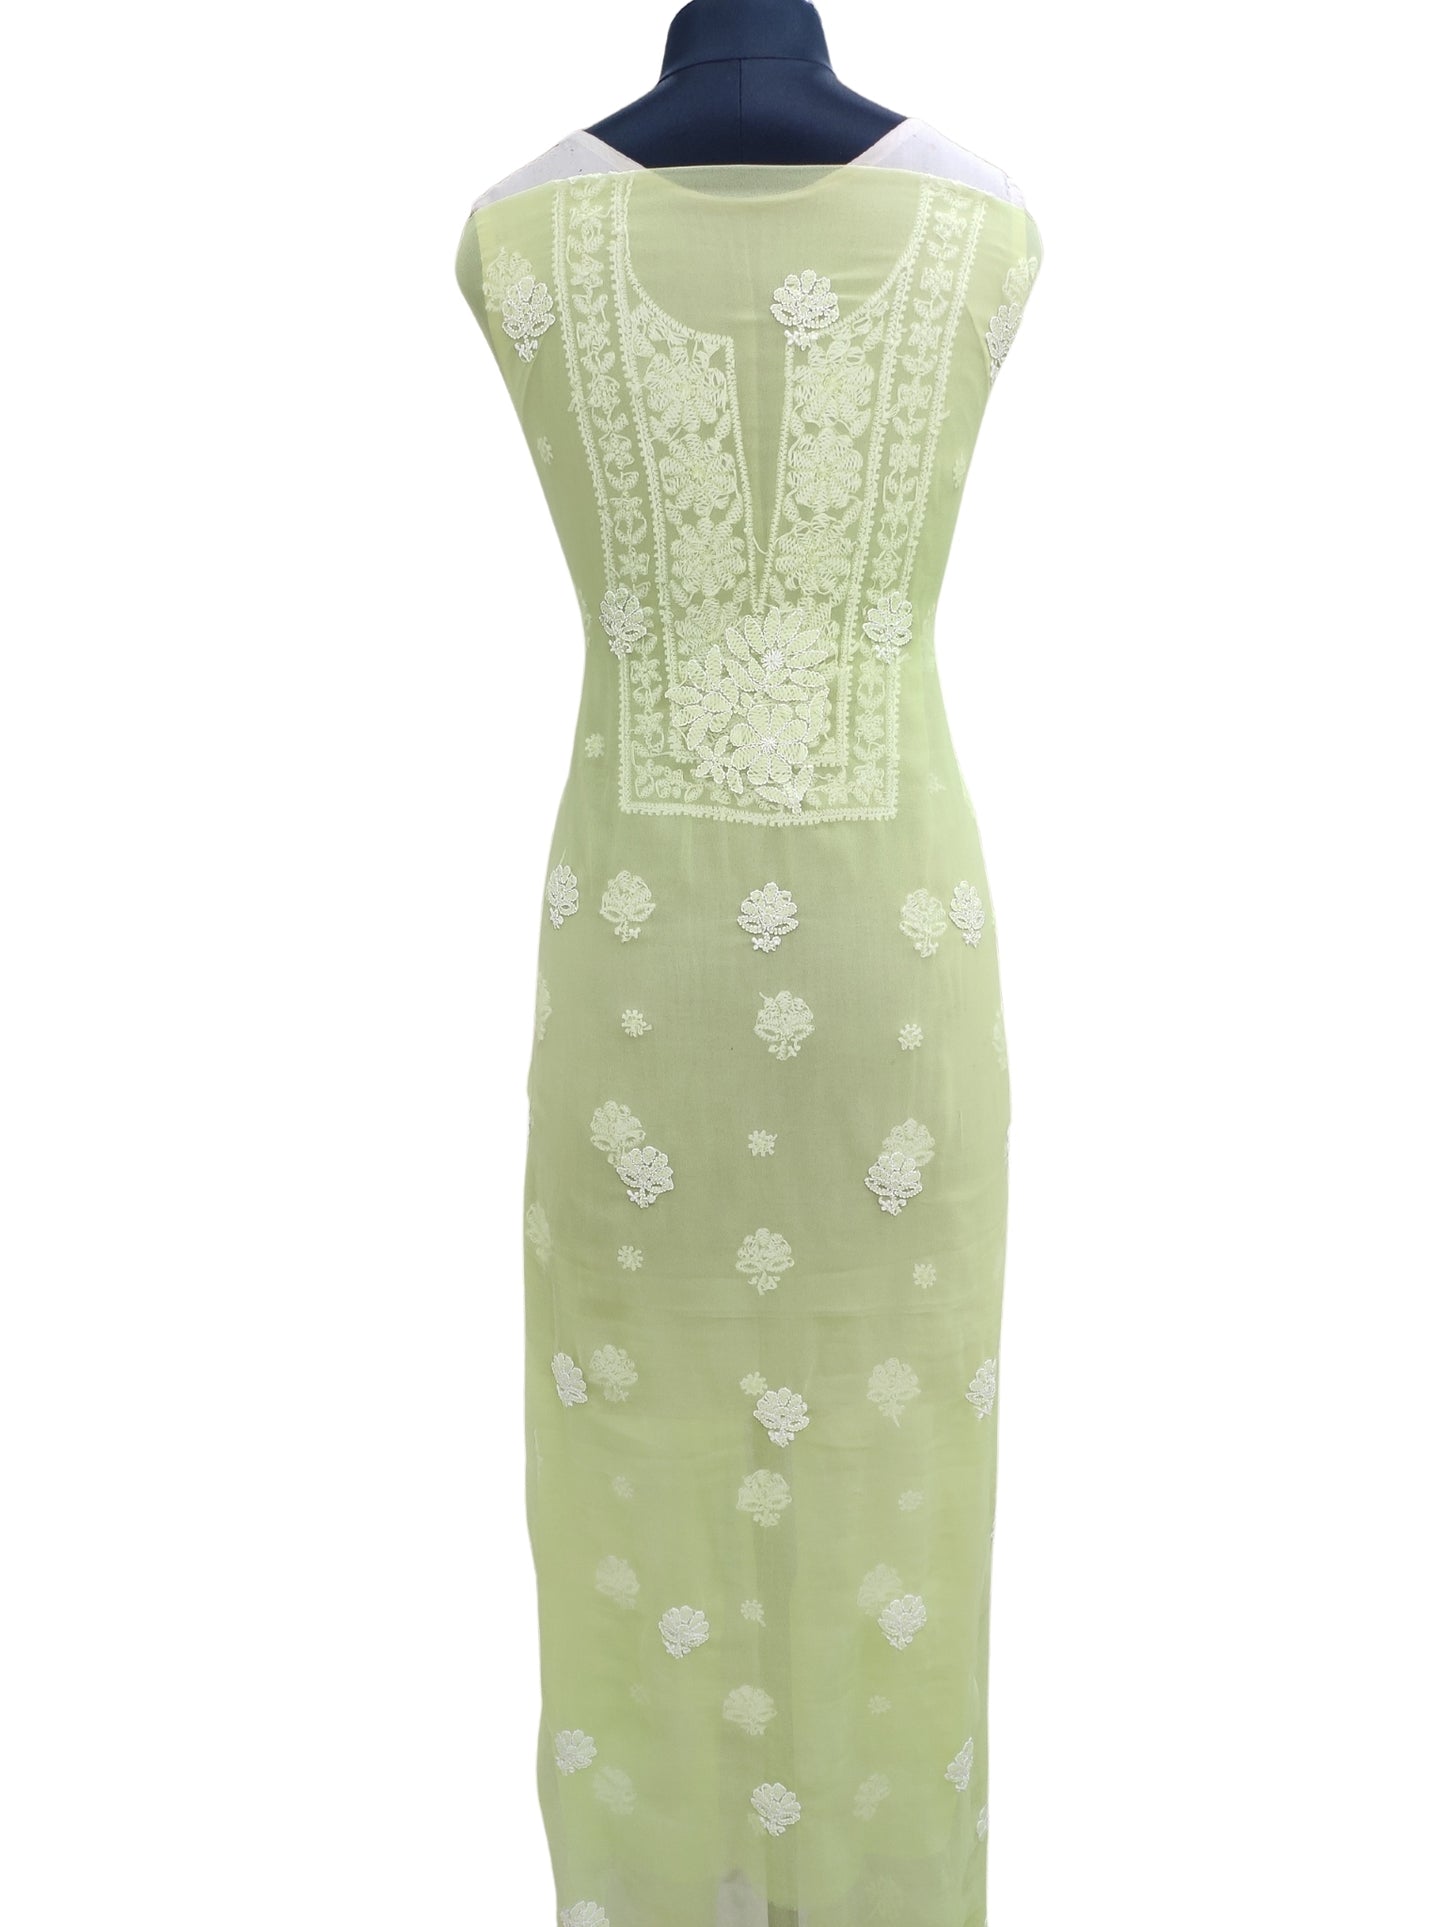 Shyamal Chikan Hand Embroidered Green Georgette Lucknowi Chikankari Unstitched Suit Piece - S21941